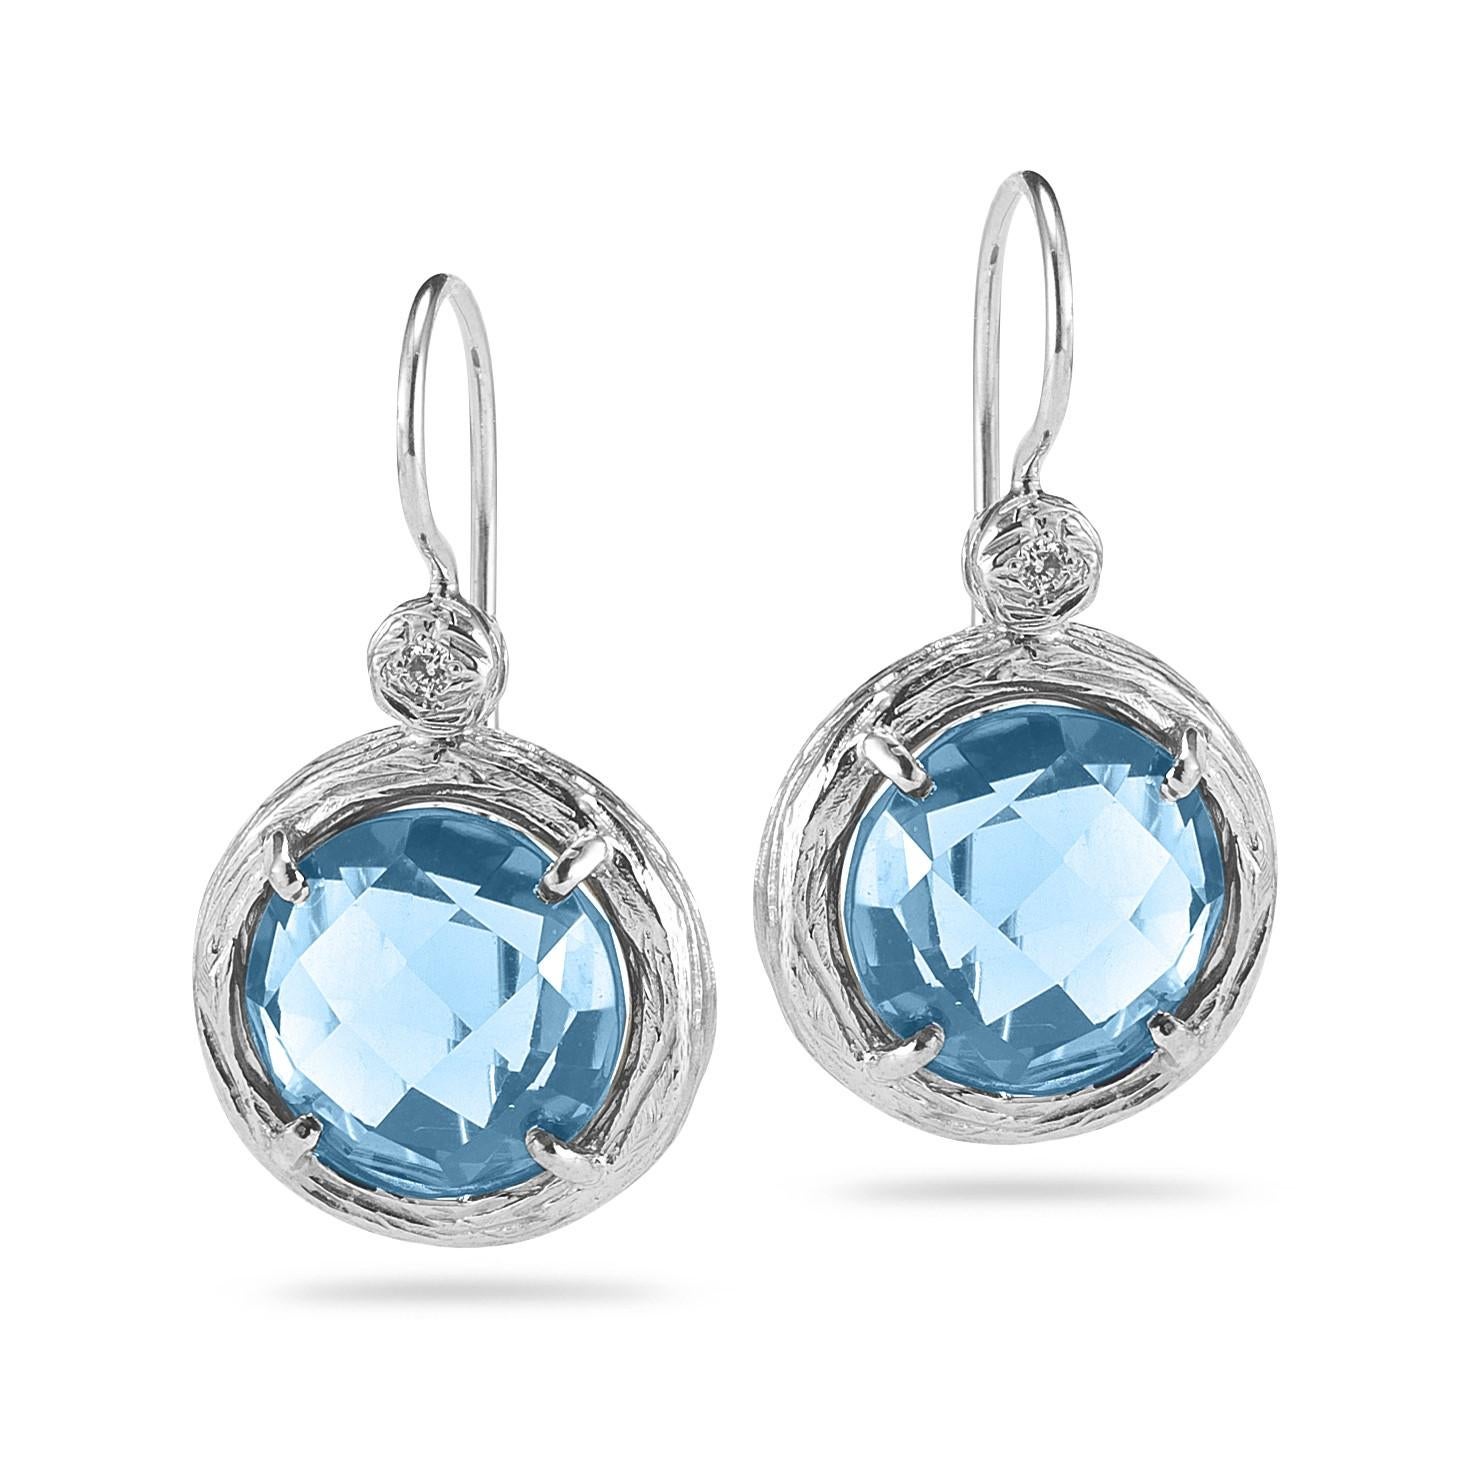 14 Karat White Gold Hand-Crafted Polish-Finished Drop Earrings, Set with 10mm Checkerboard Round Blue Topaz Semi-Precious Color Stones, and Accented with 0.03 Carats of Bezel Set Diamonds. Gemstone TCW: 6CT
